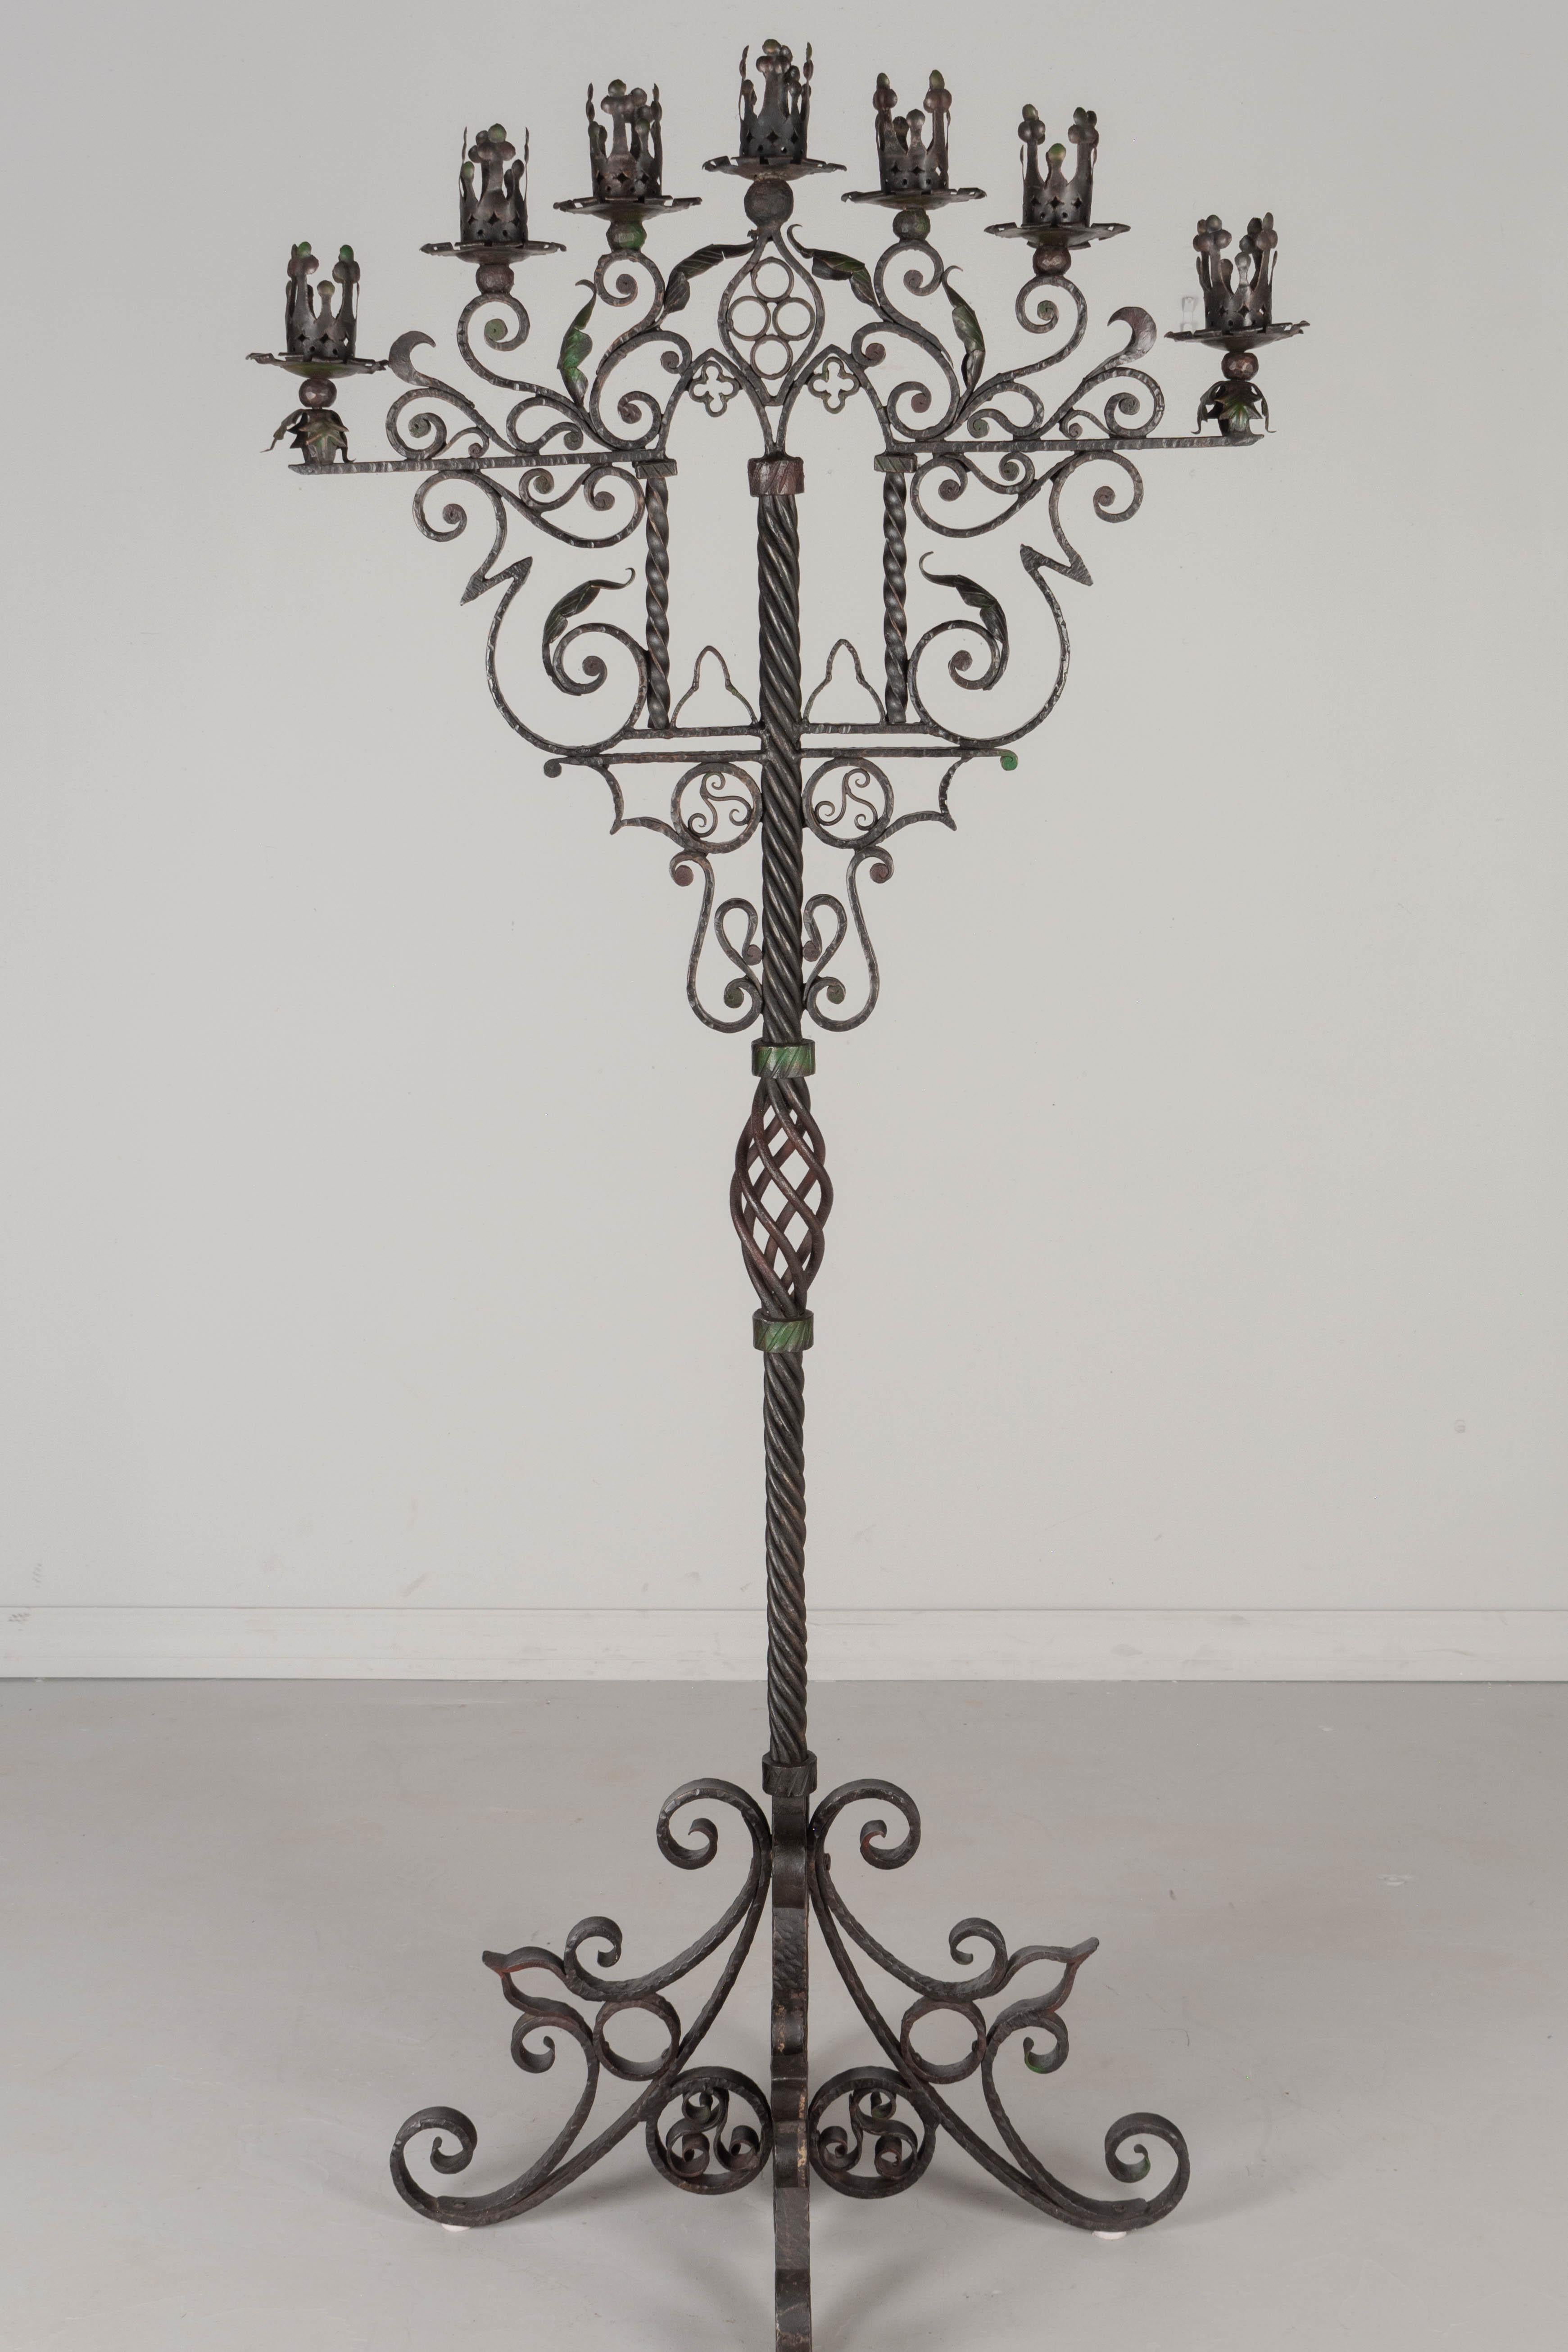 Hand-Crafted Spanish Baroque Wrought Iron Floor Candelabra For Sale